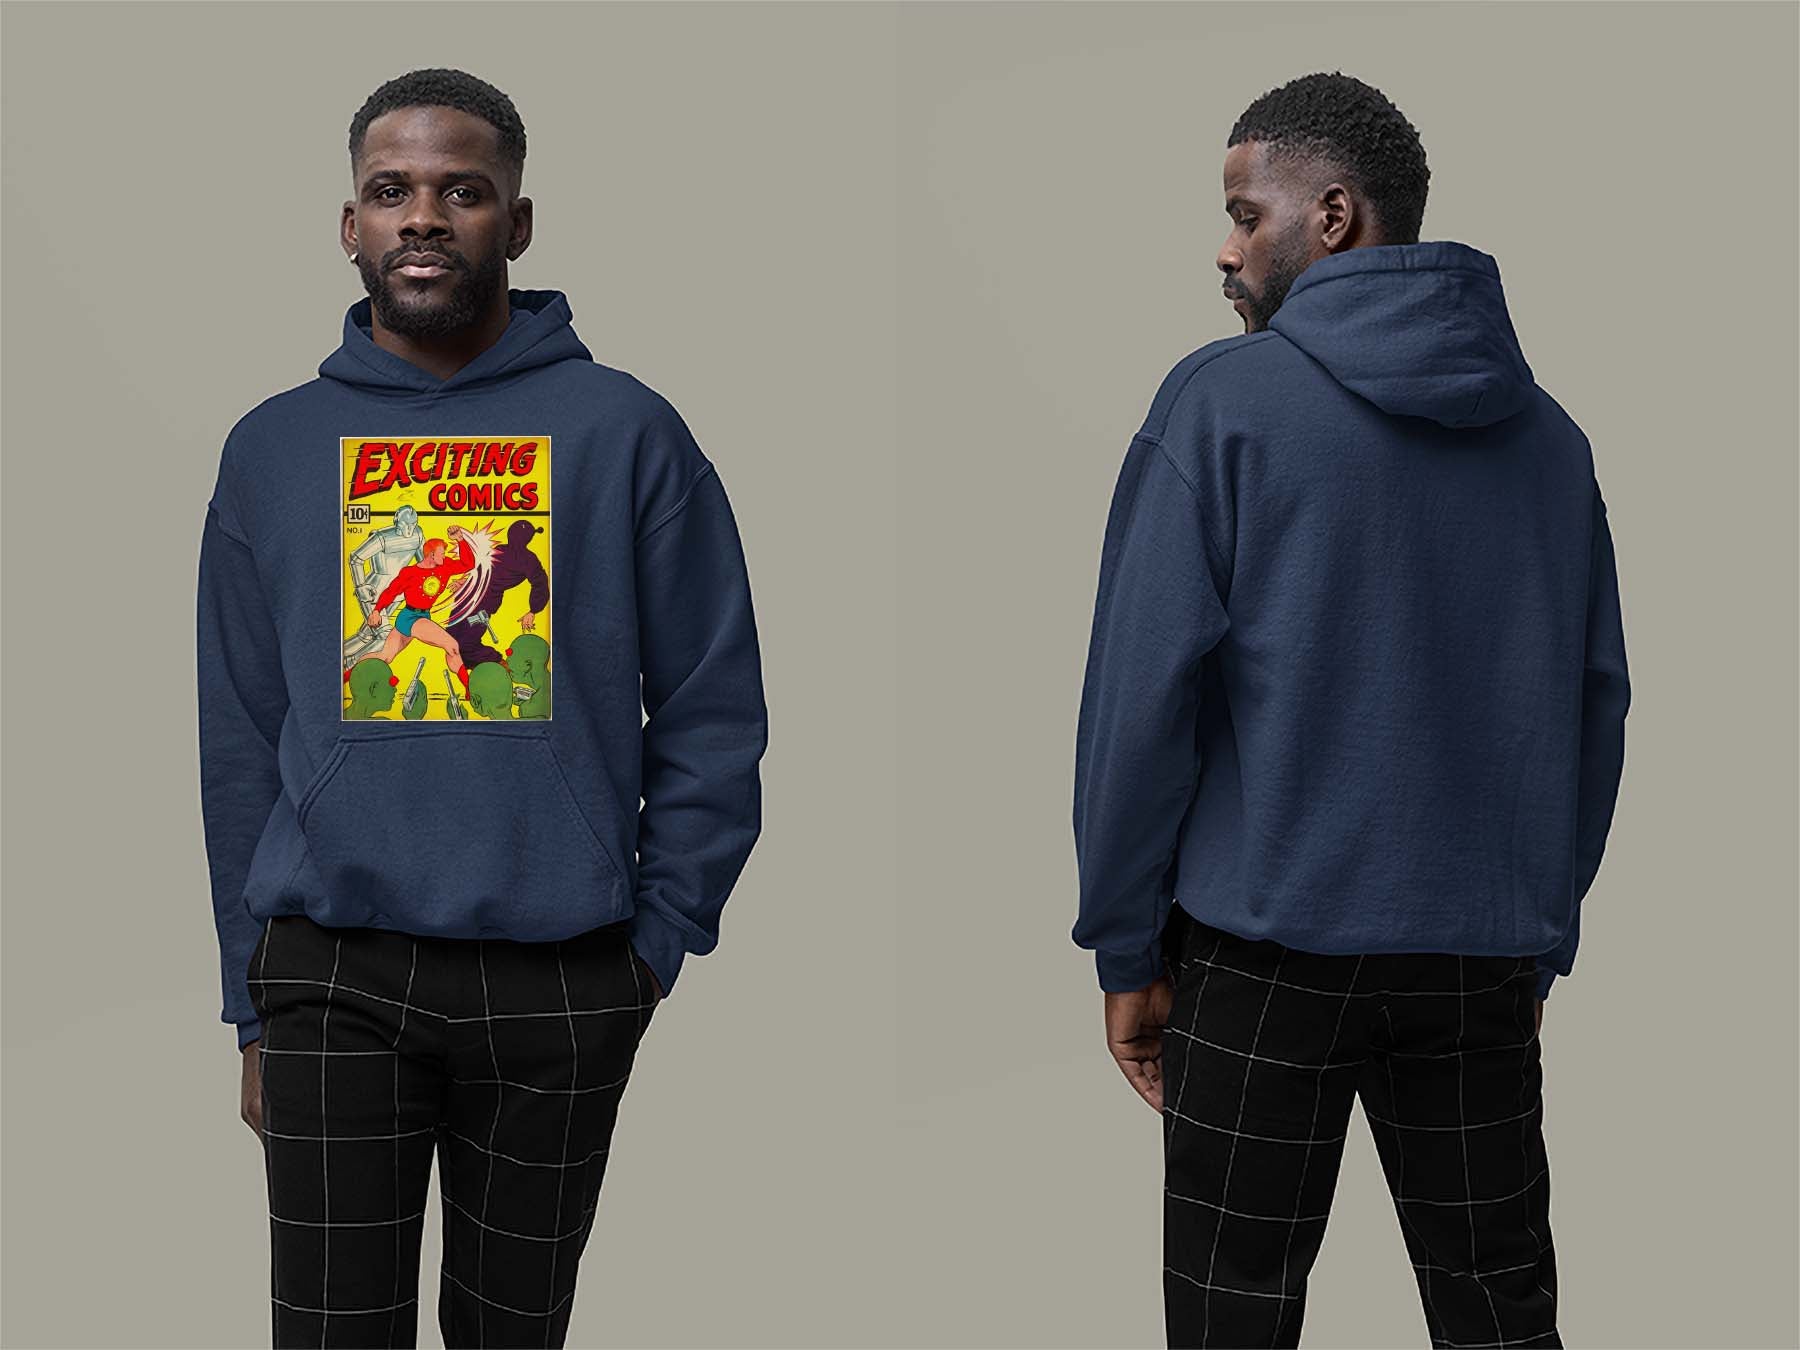 Exciting Comics No.1 Hoodie Small Navy